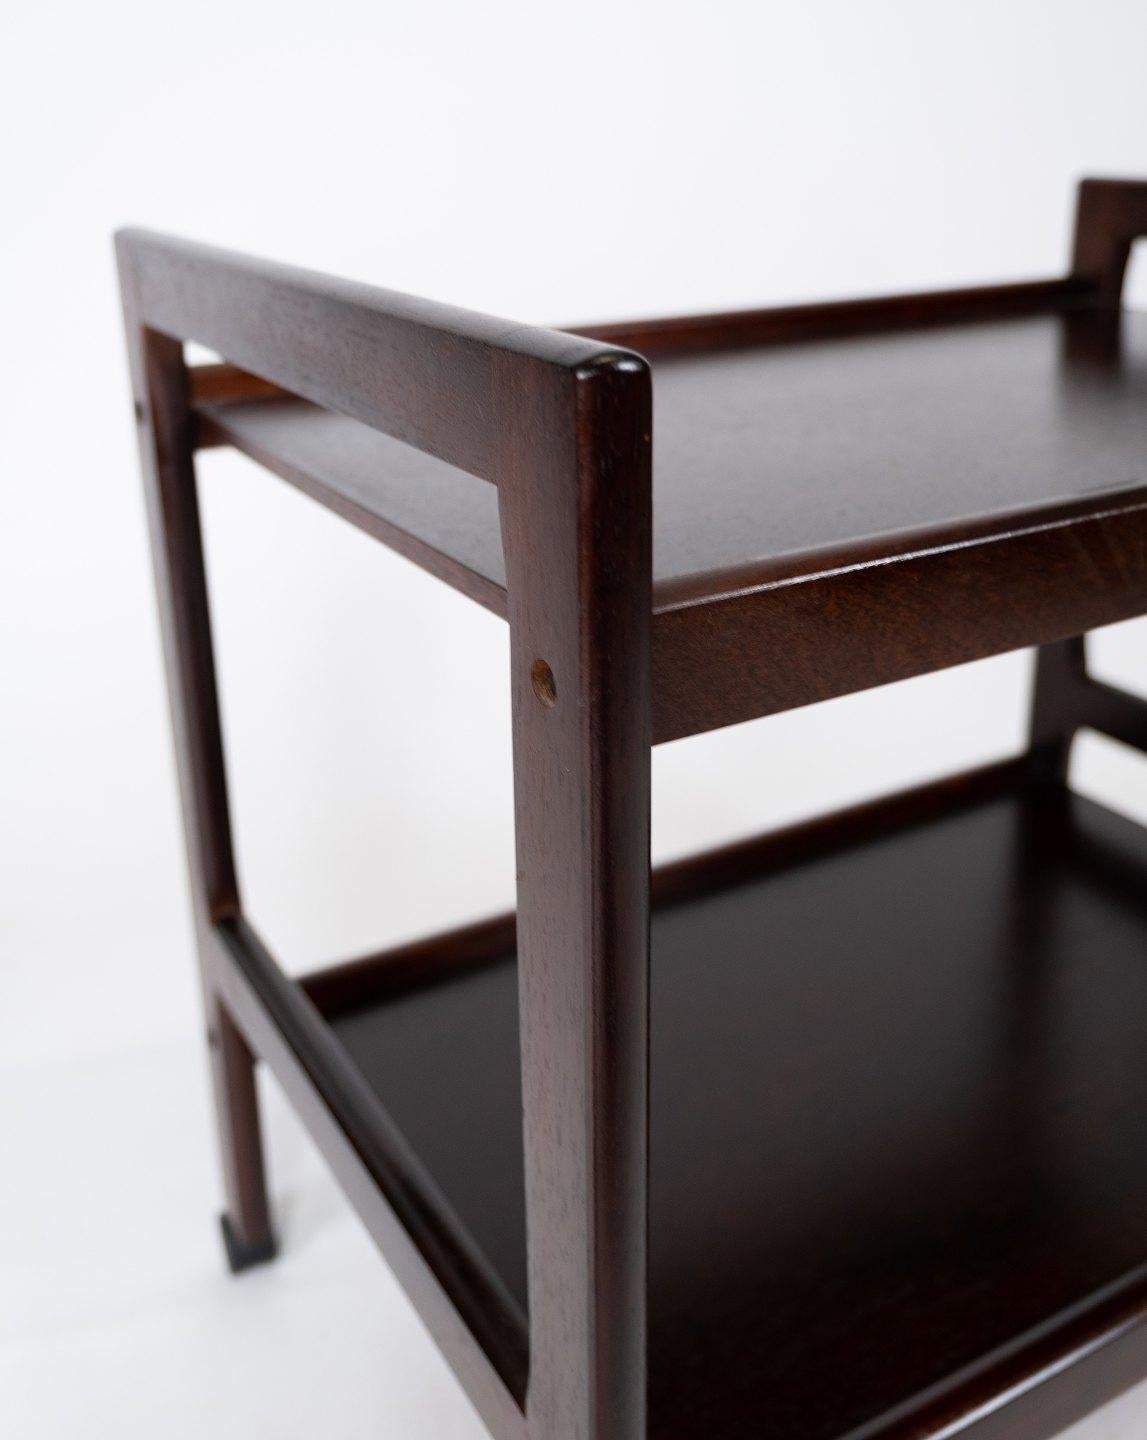 Mid-20th Century Trolley Table Made In Mahogany, Danish Design From 1960s For Sale